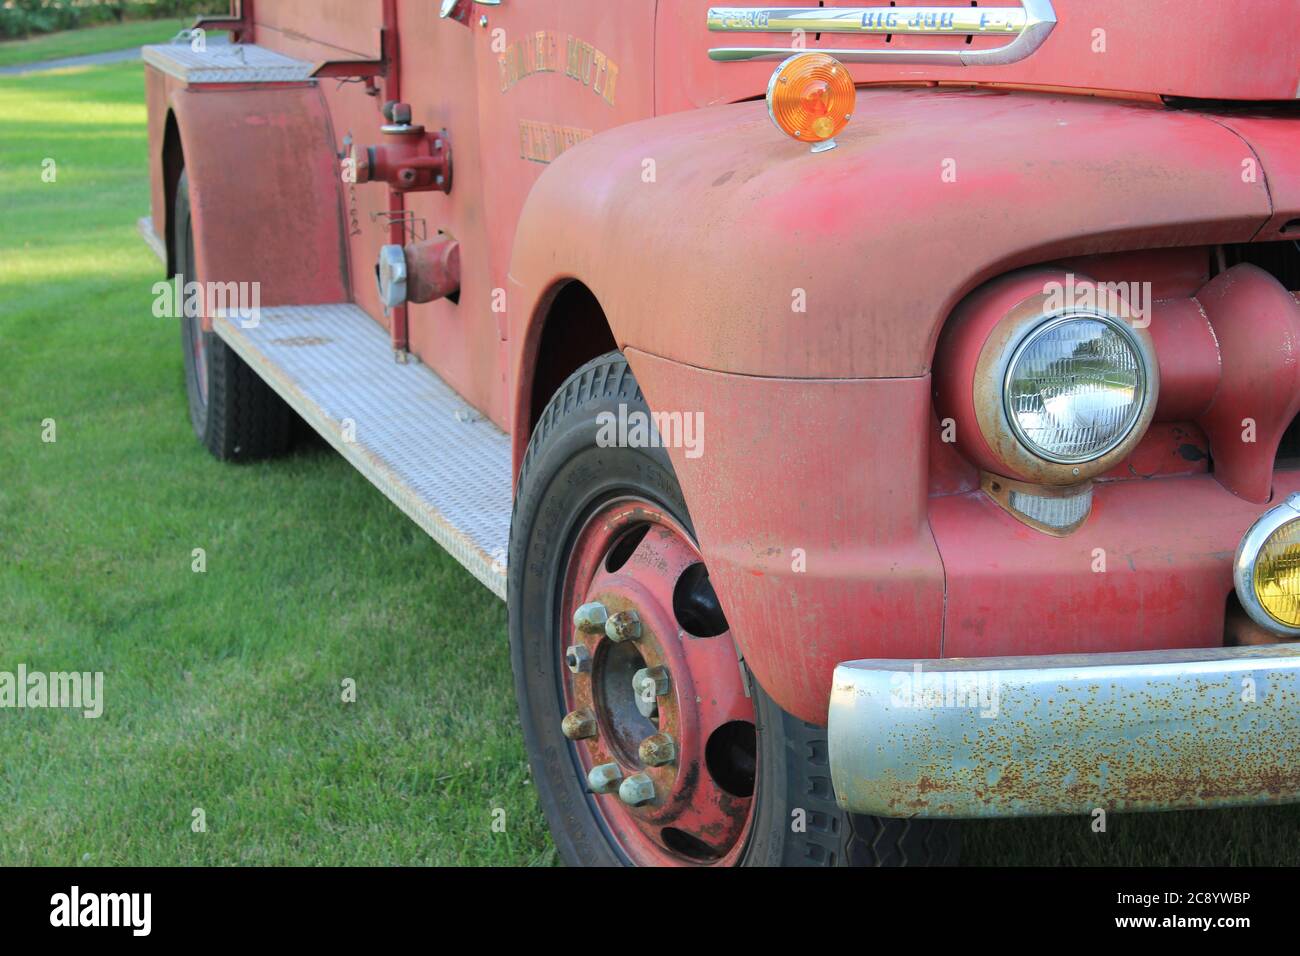 1951 Ford Fire Truck Stock Photo